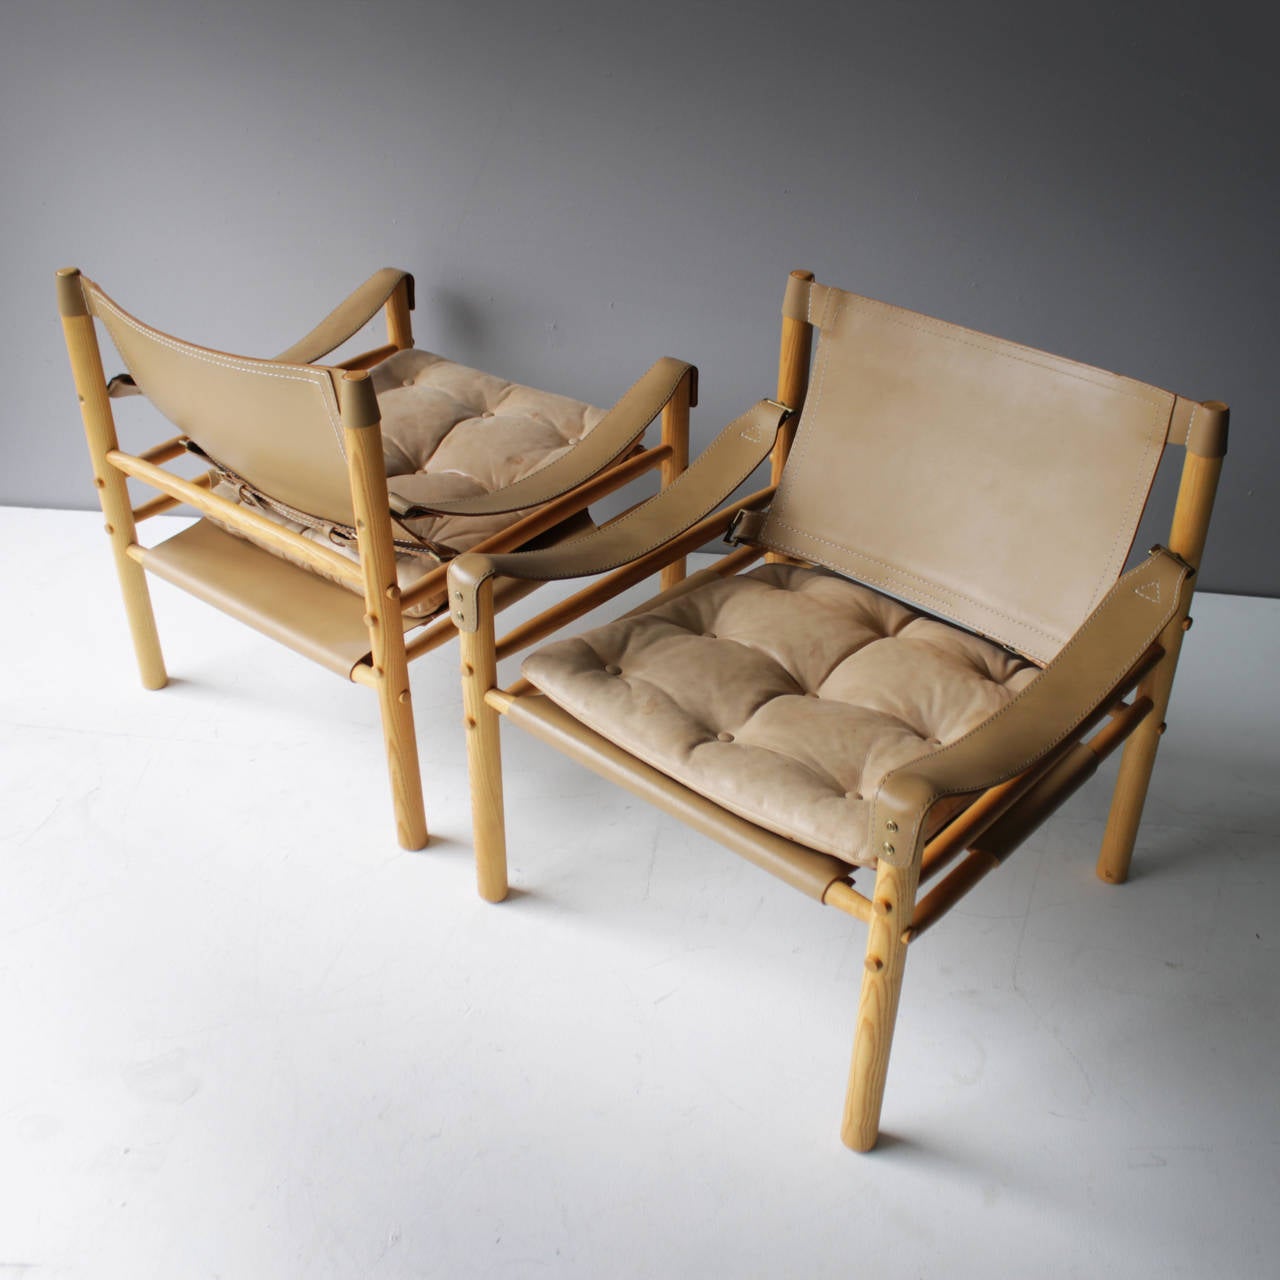 A pair of 'Scirocco' safari chairs by Arne Norell with varnished ash frame mounted with pale sandy harness leather, loose seat cushions with buttoned leather covers. 
Produced by Aneby Møbler.